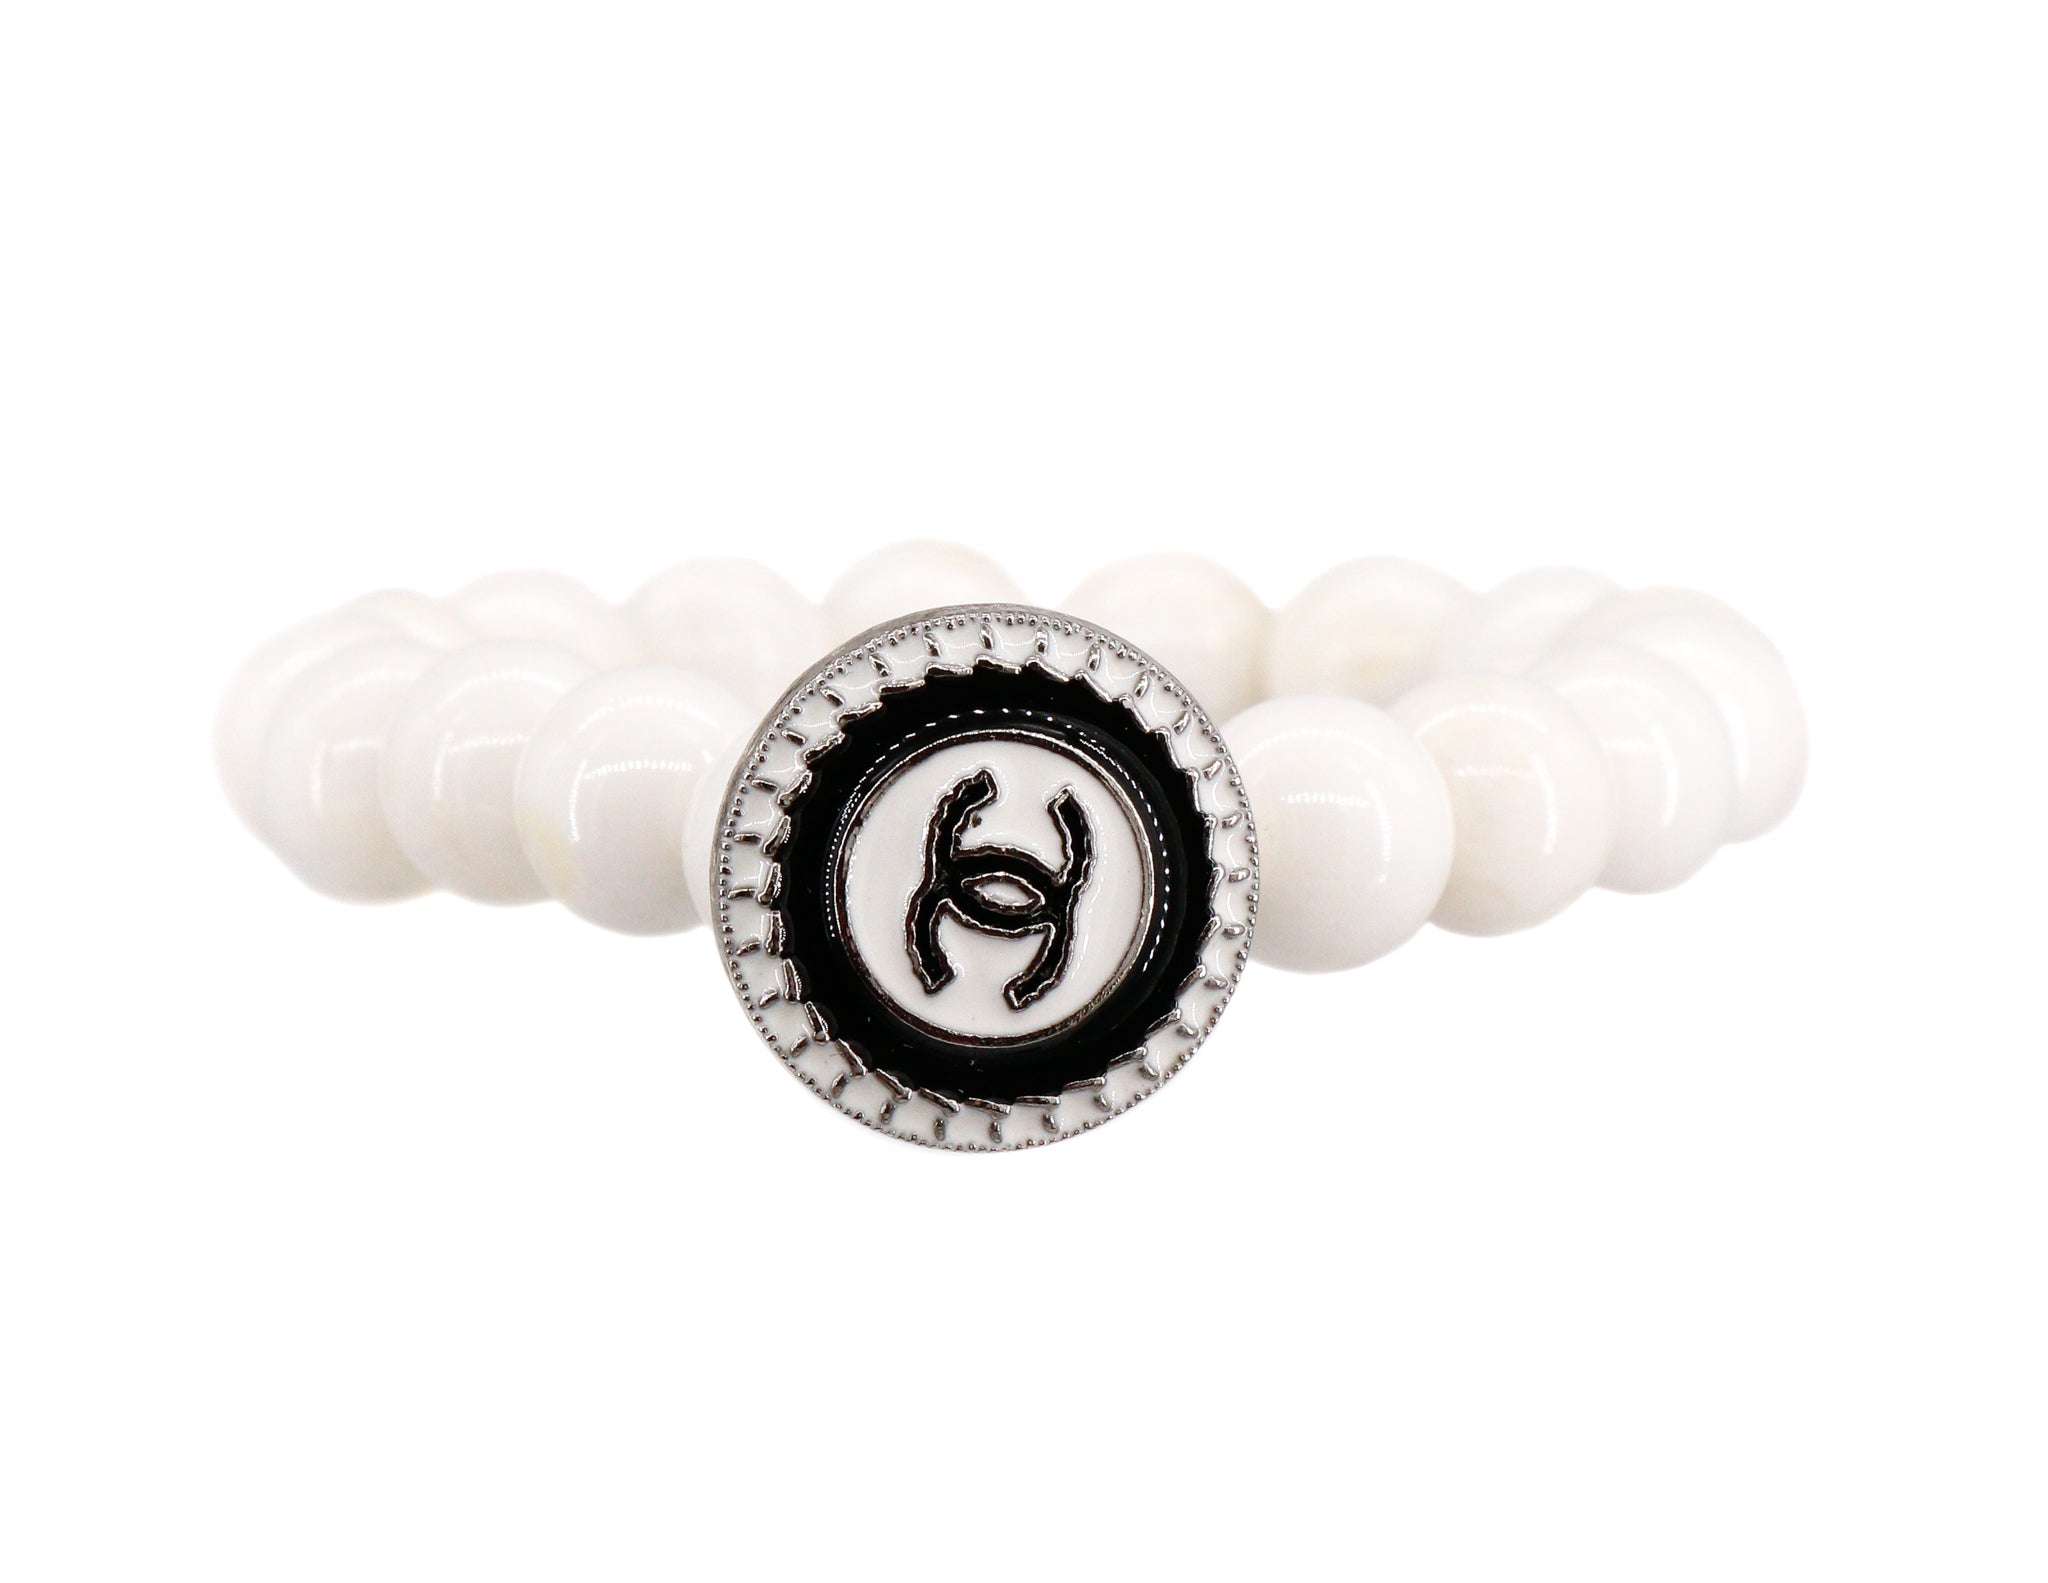 Conch bracelet with a black and white designer button